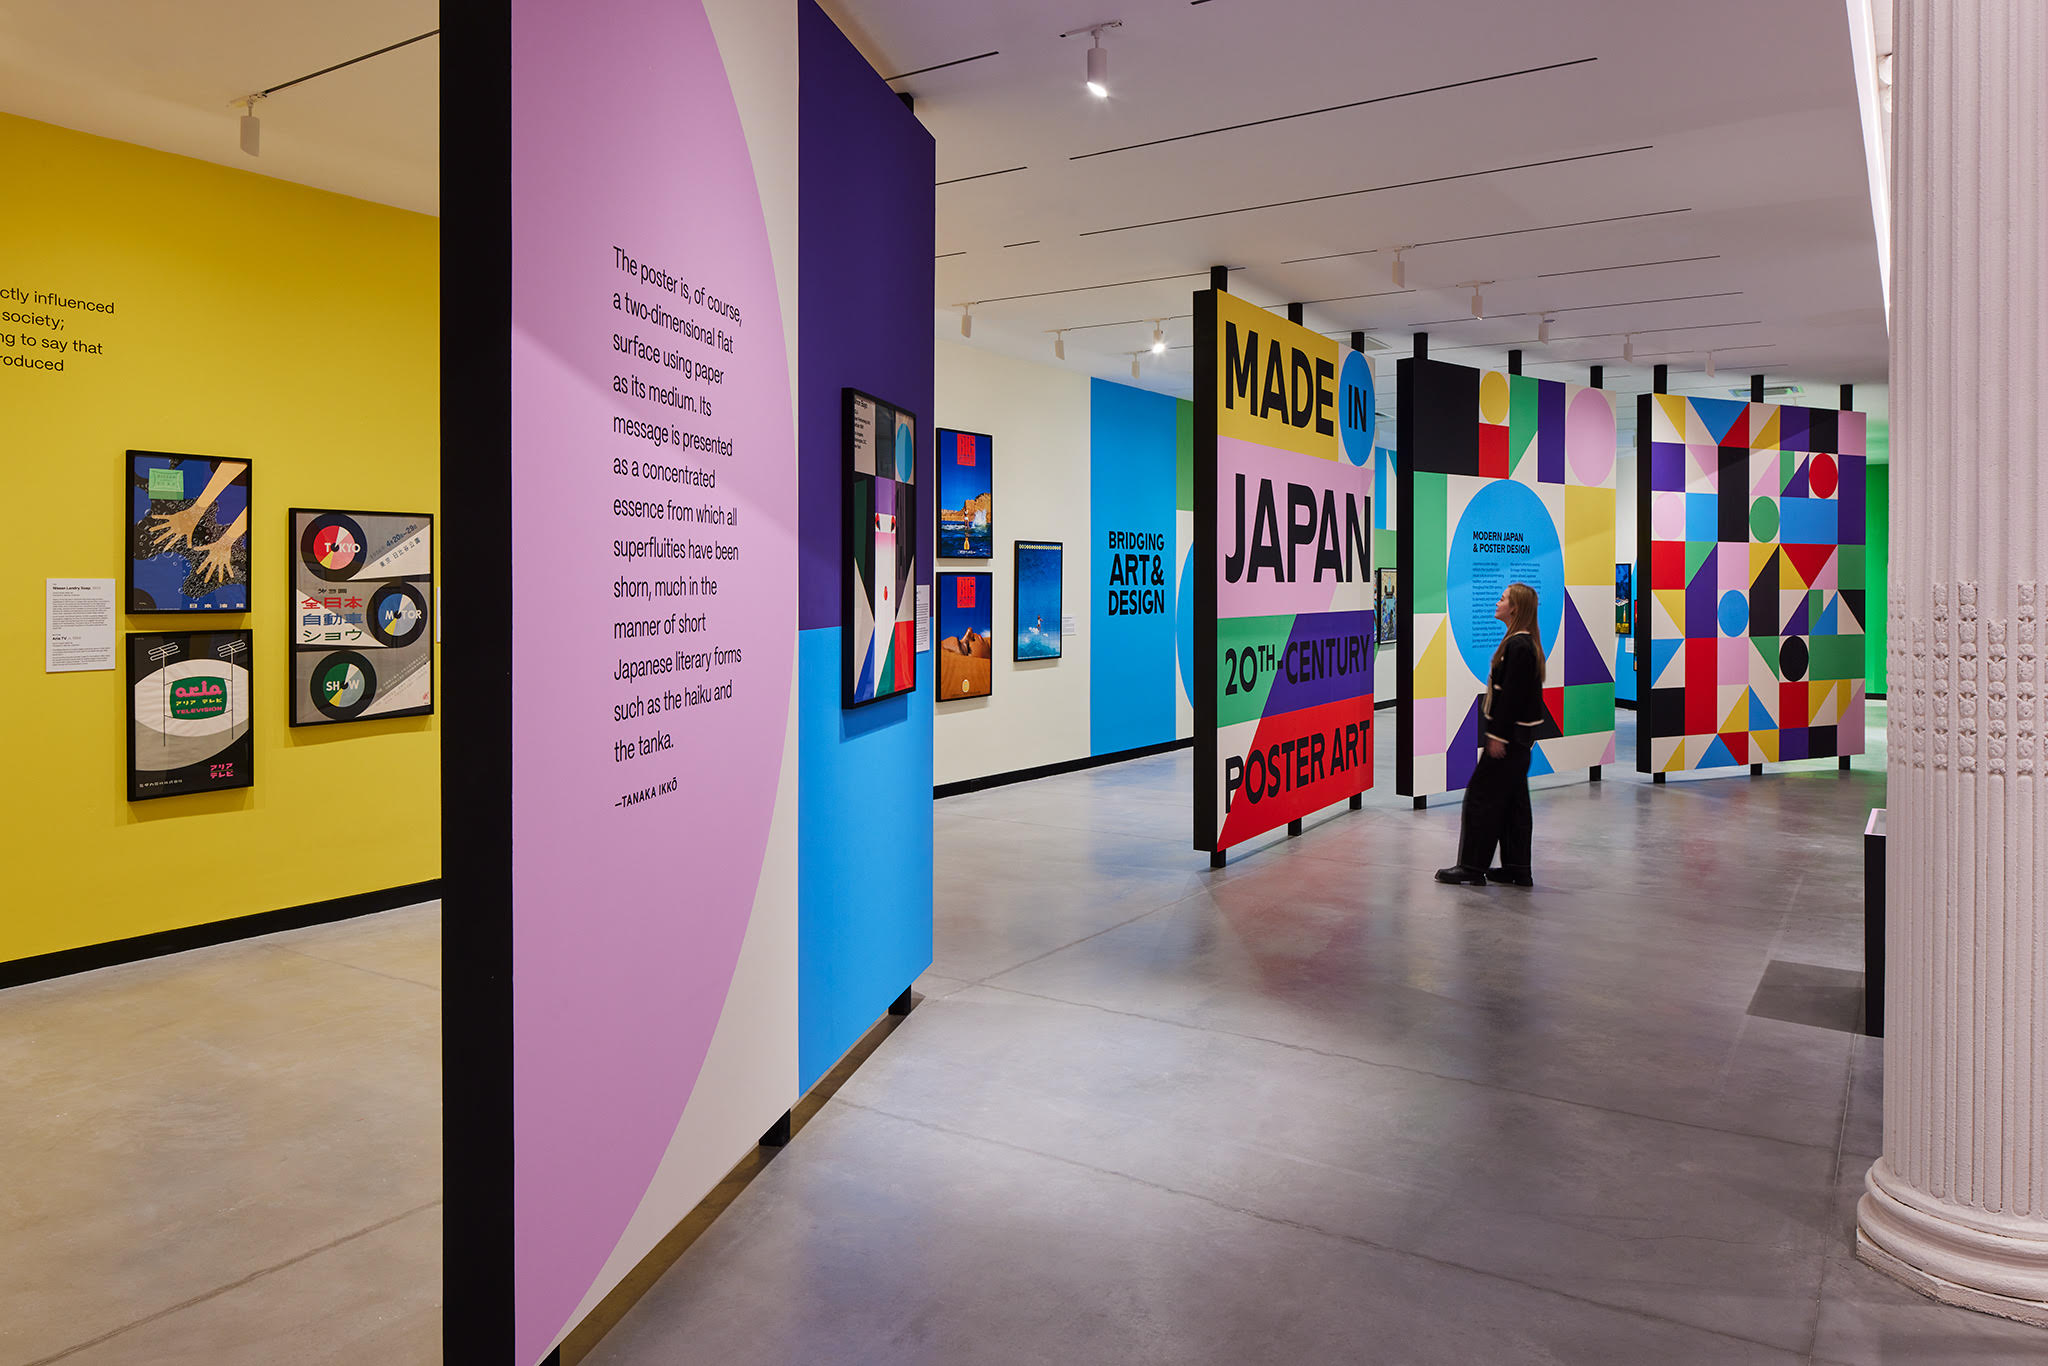 Photograph of the interior of a colorful gallery.